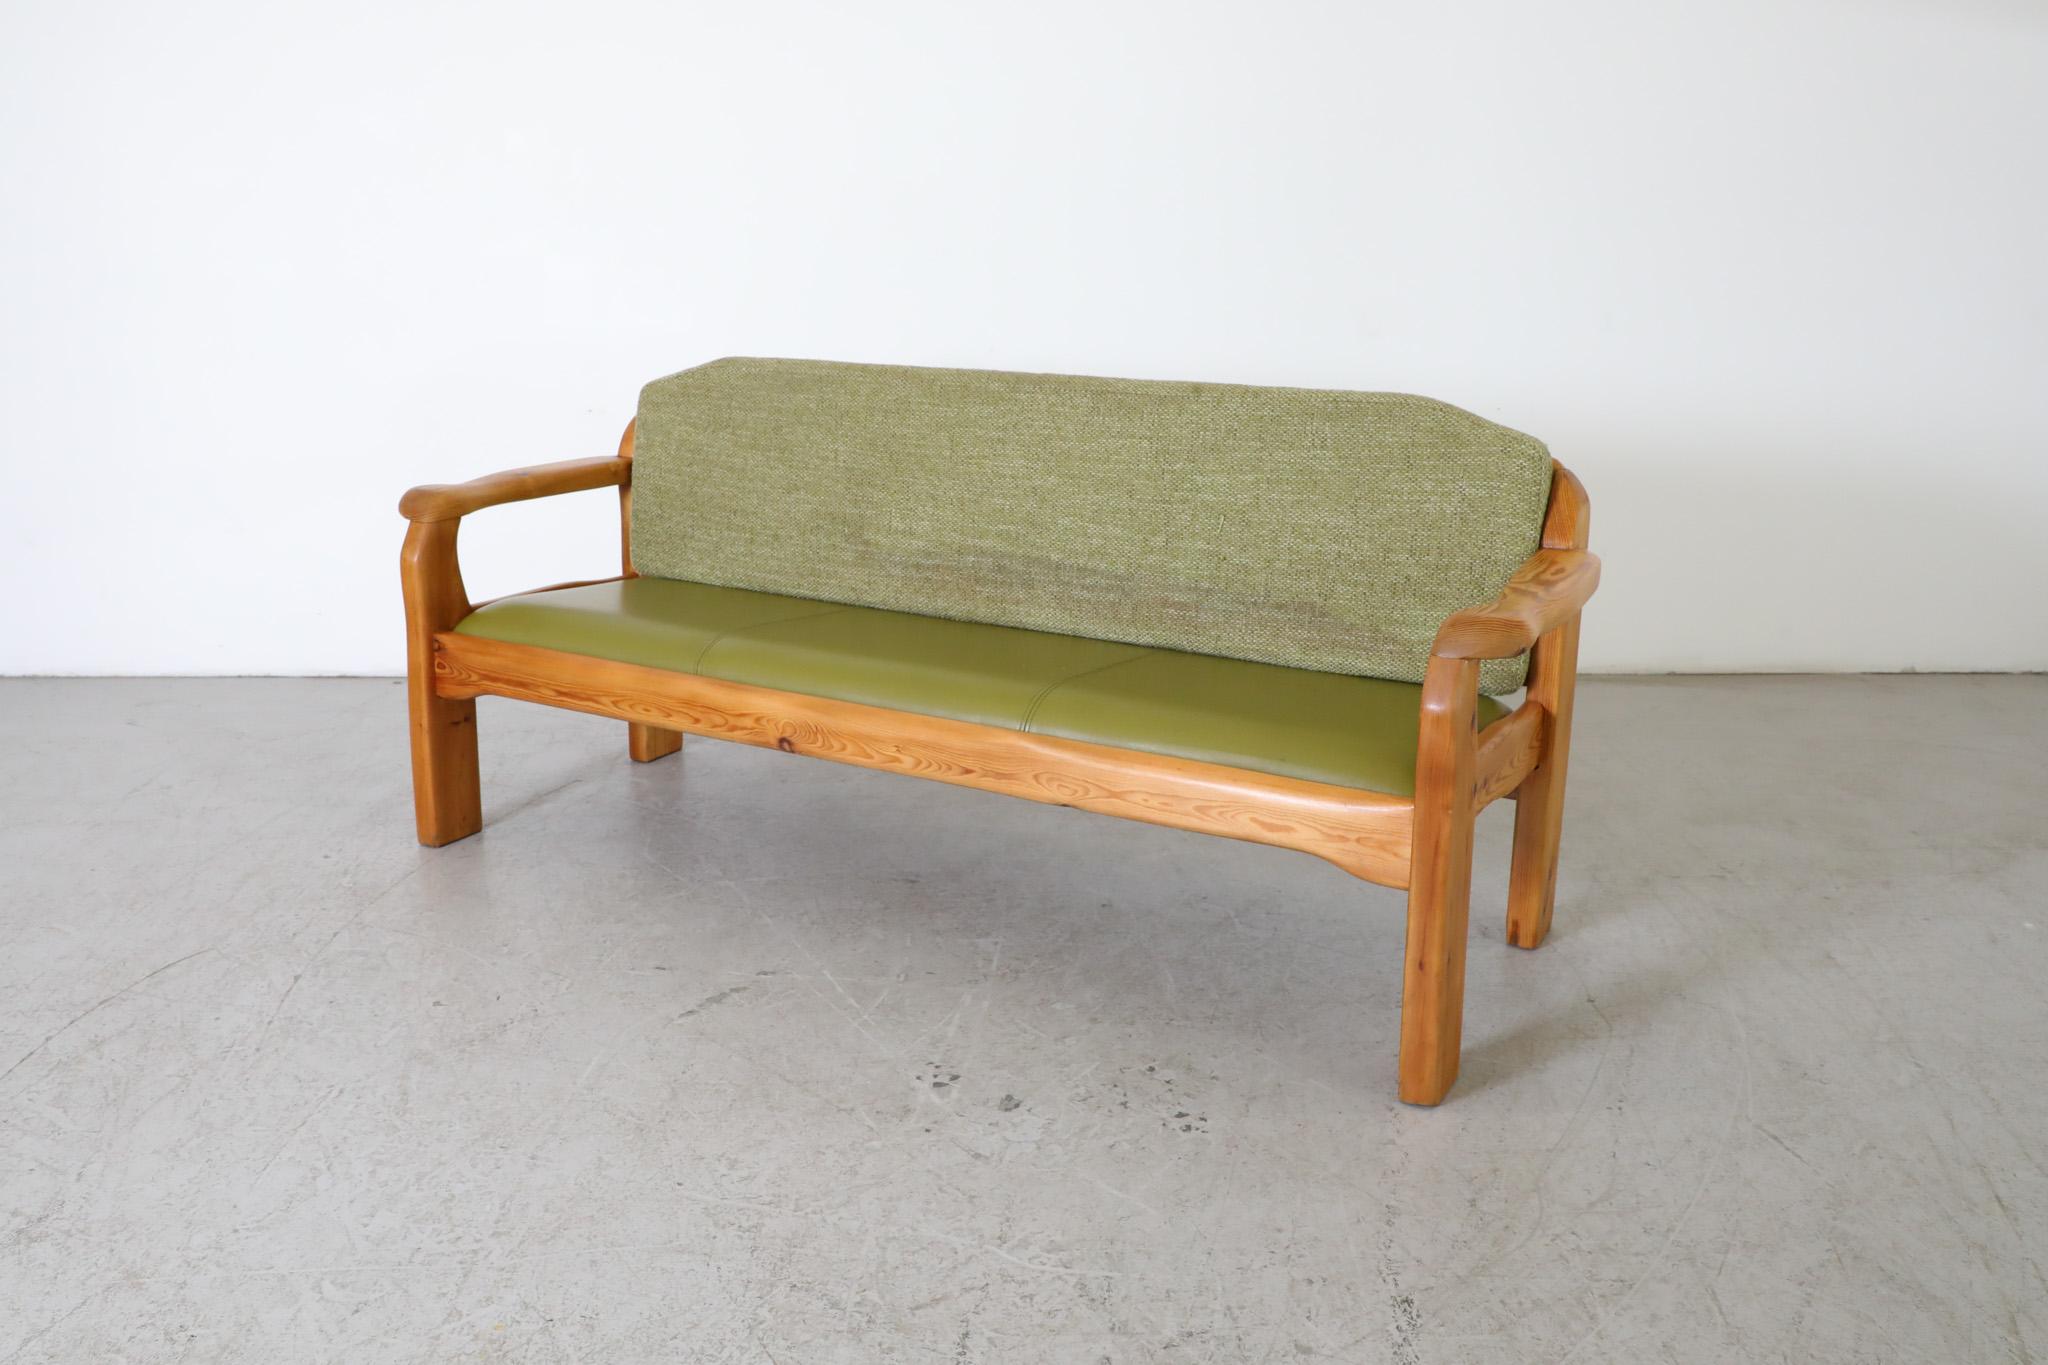 Dutch Ate van Apeldoorn Inspired Pine Bench with Green Cushions & Hand Carved Details For Sale